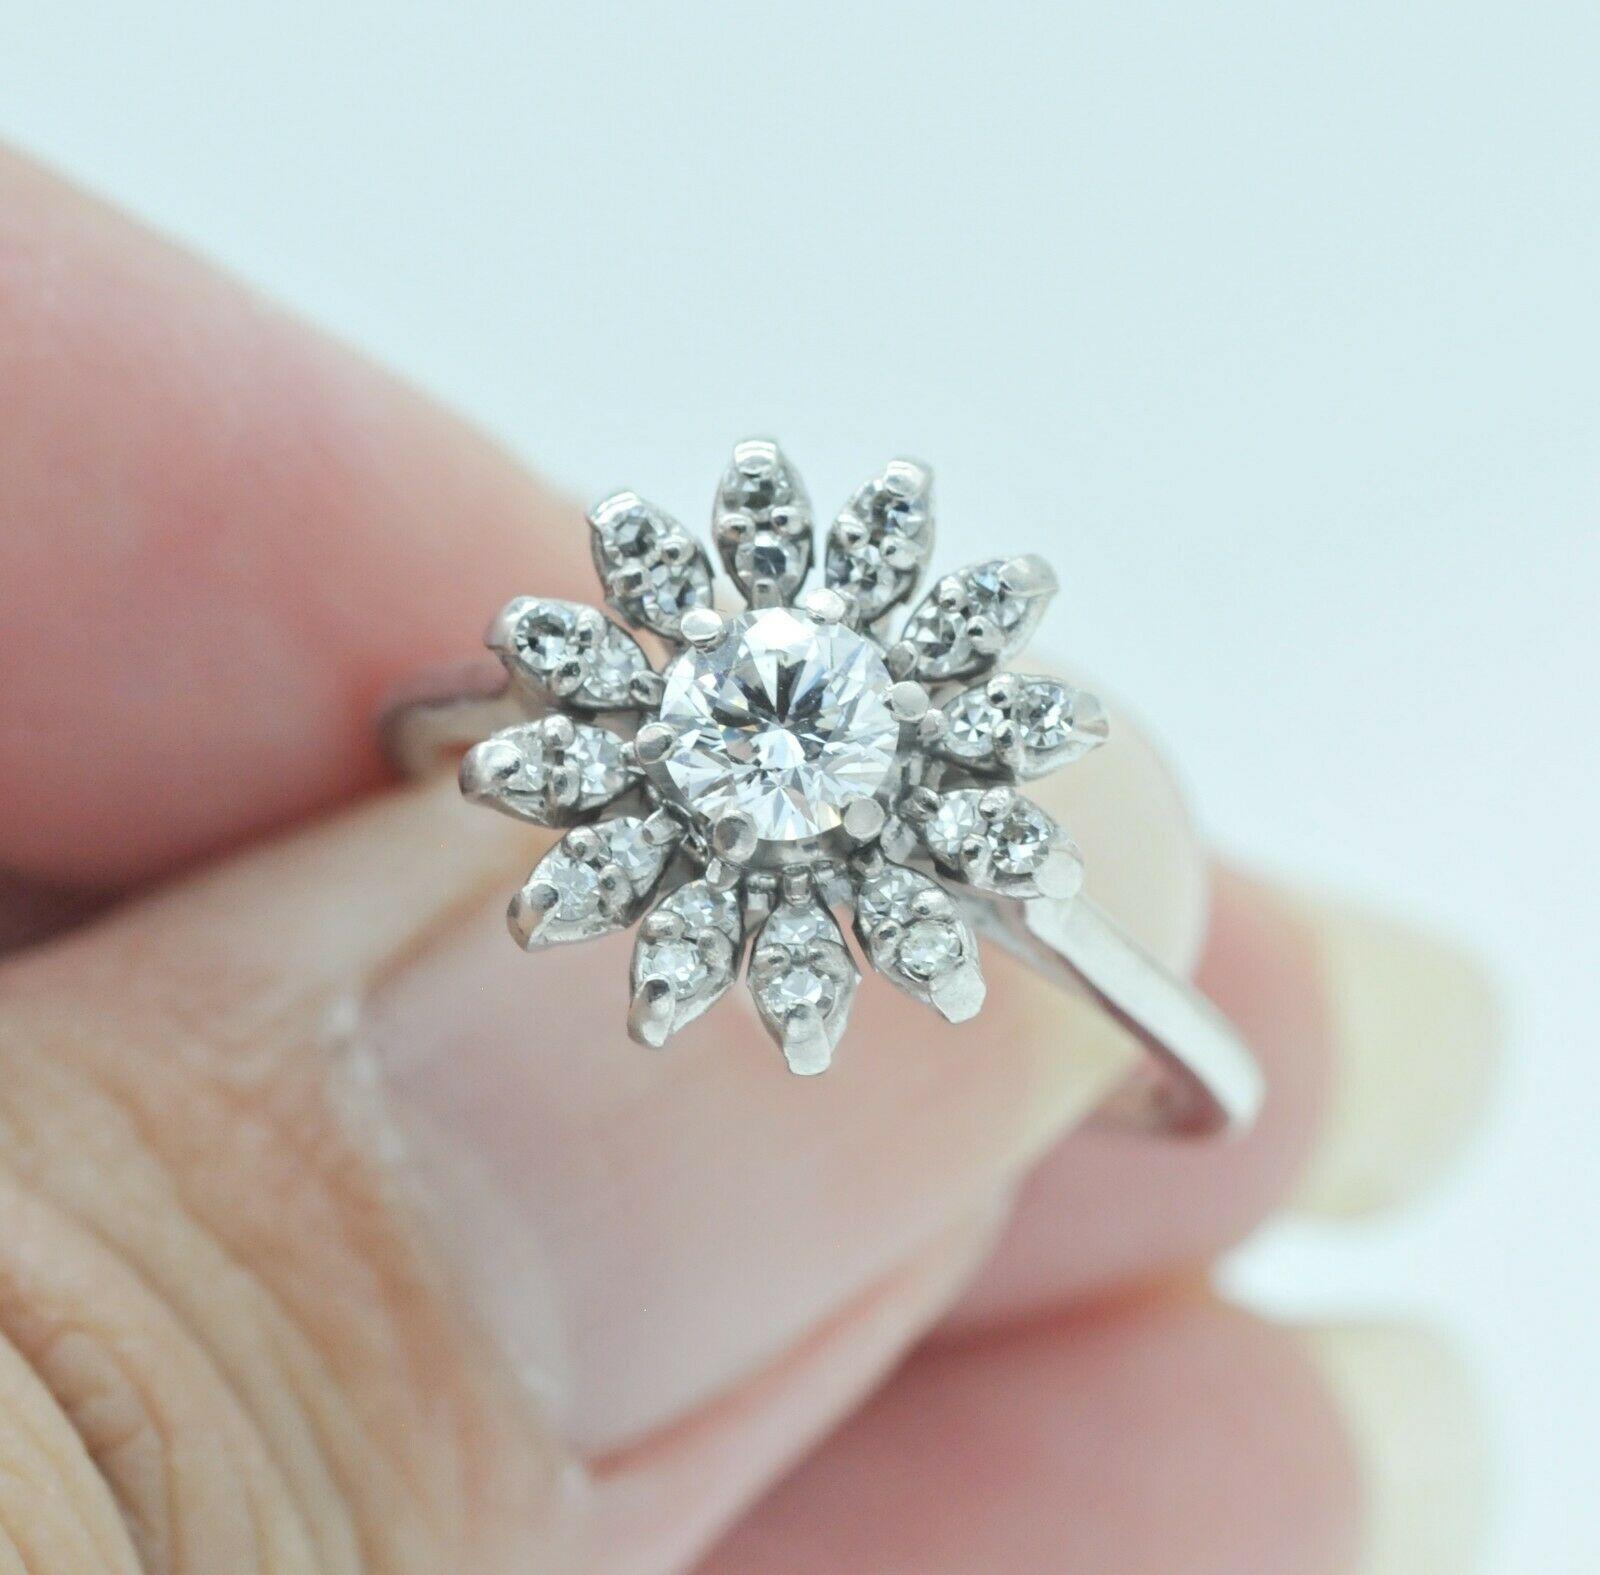  14K WHITE GOLD DIAMOND CLUSTER SUNSHINE RING 6US
Specifications:
    main stone: ROUND DIAMOND APPROX 0.40CTW
    DIAMONDS: 22 PCS ROUND DIAM APPROX 0.16CTW
    carat total weight: APPROX 0.56 CTW
    color: G
    clarity: VS
    brand: NONE
   